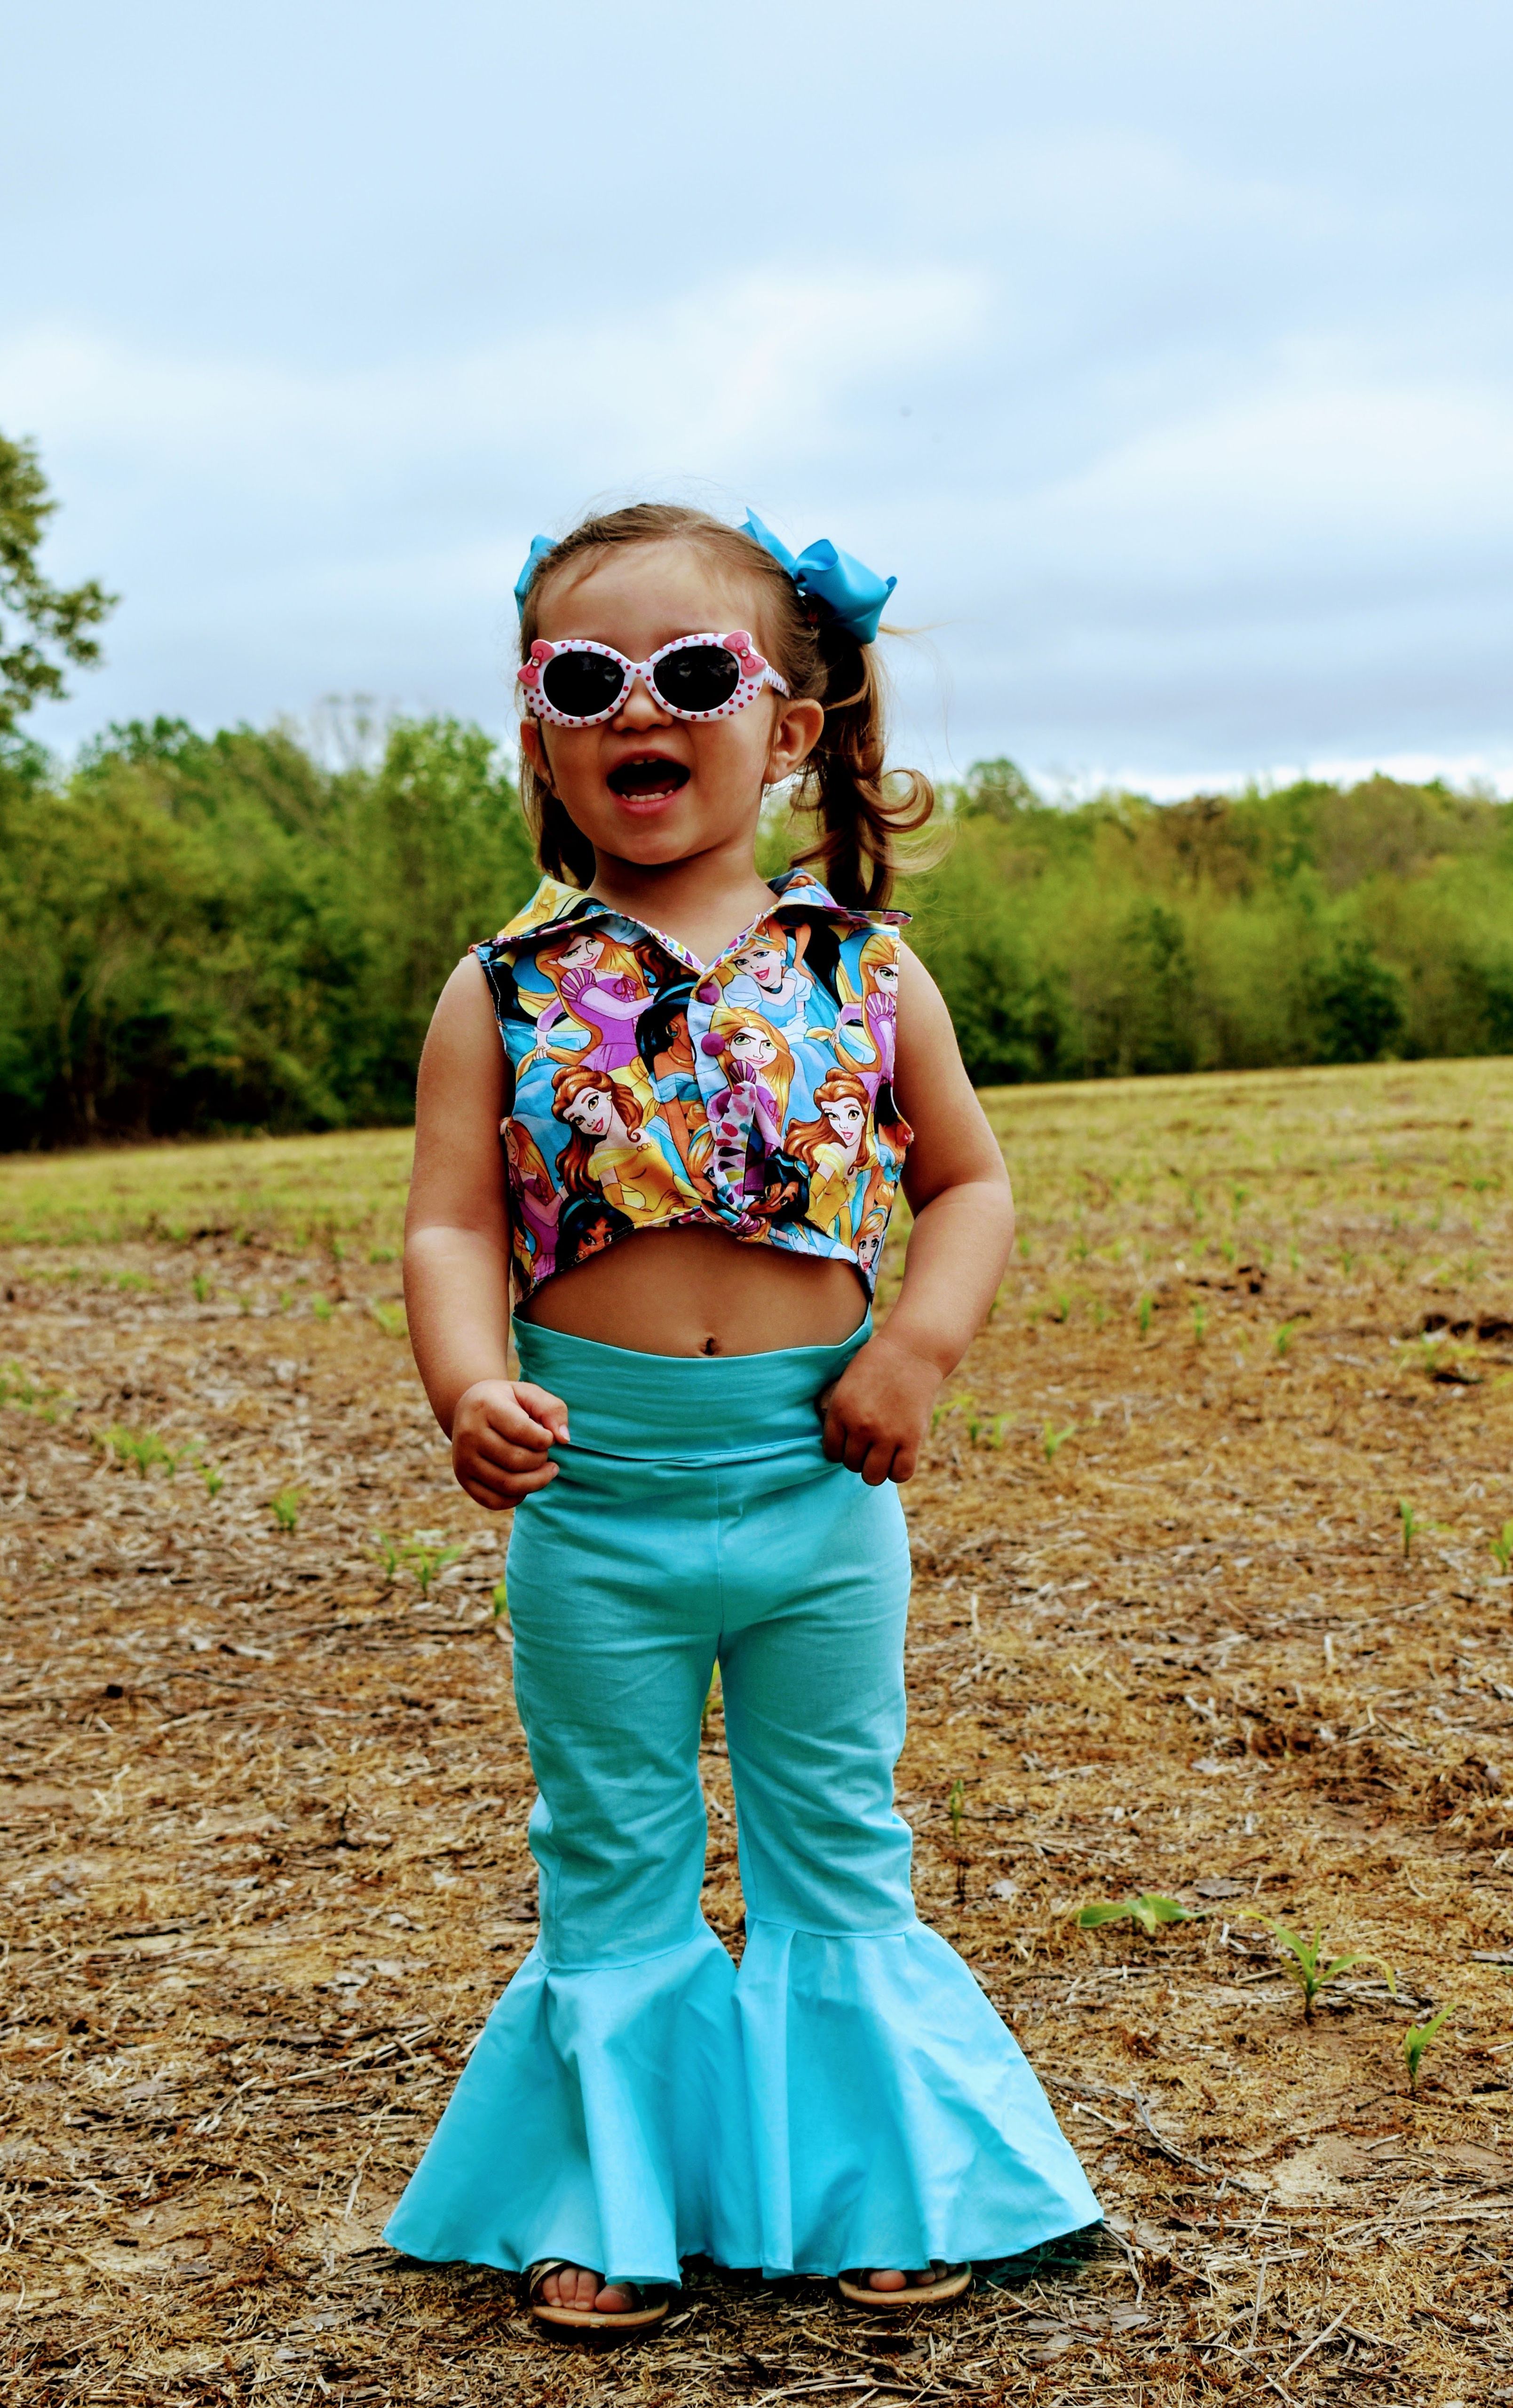 Sunshine's Tie Front Top Sizes 2T to 14 Kids PDF Pattern